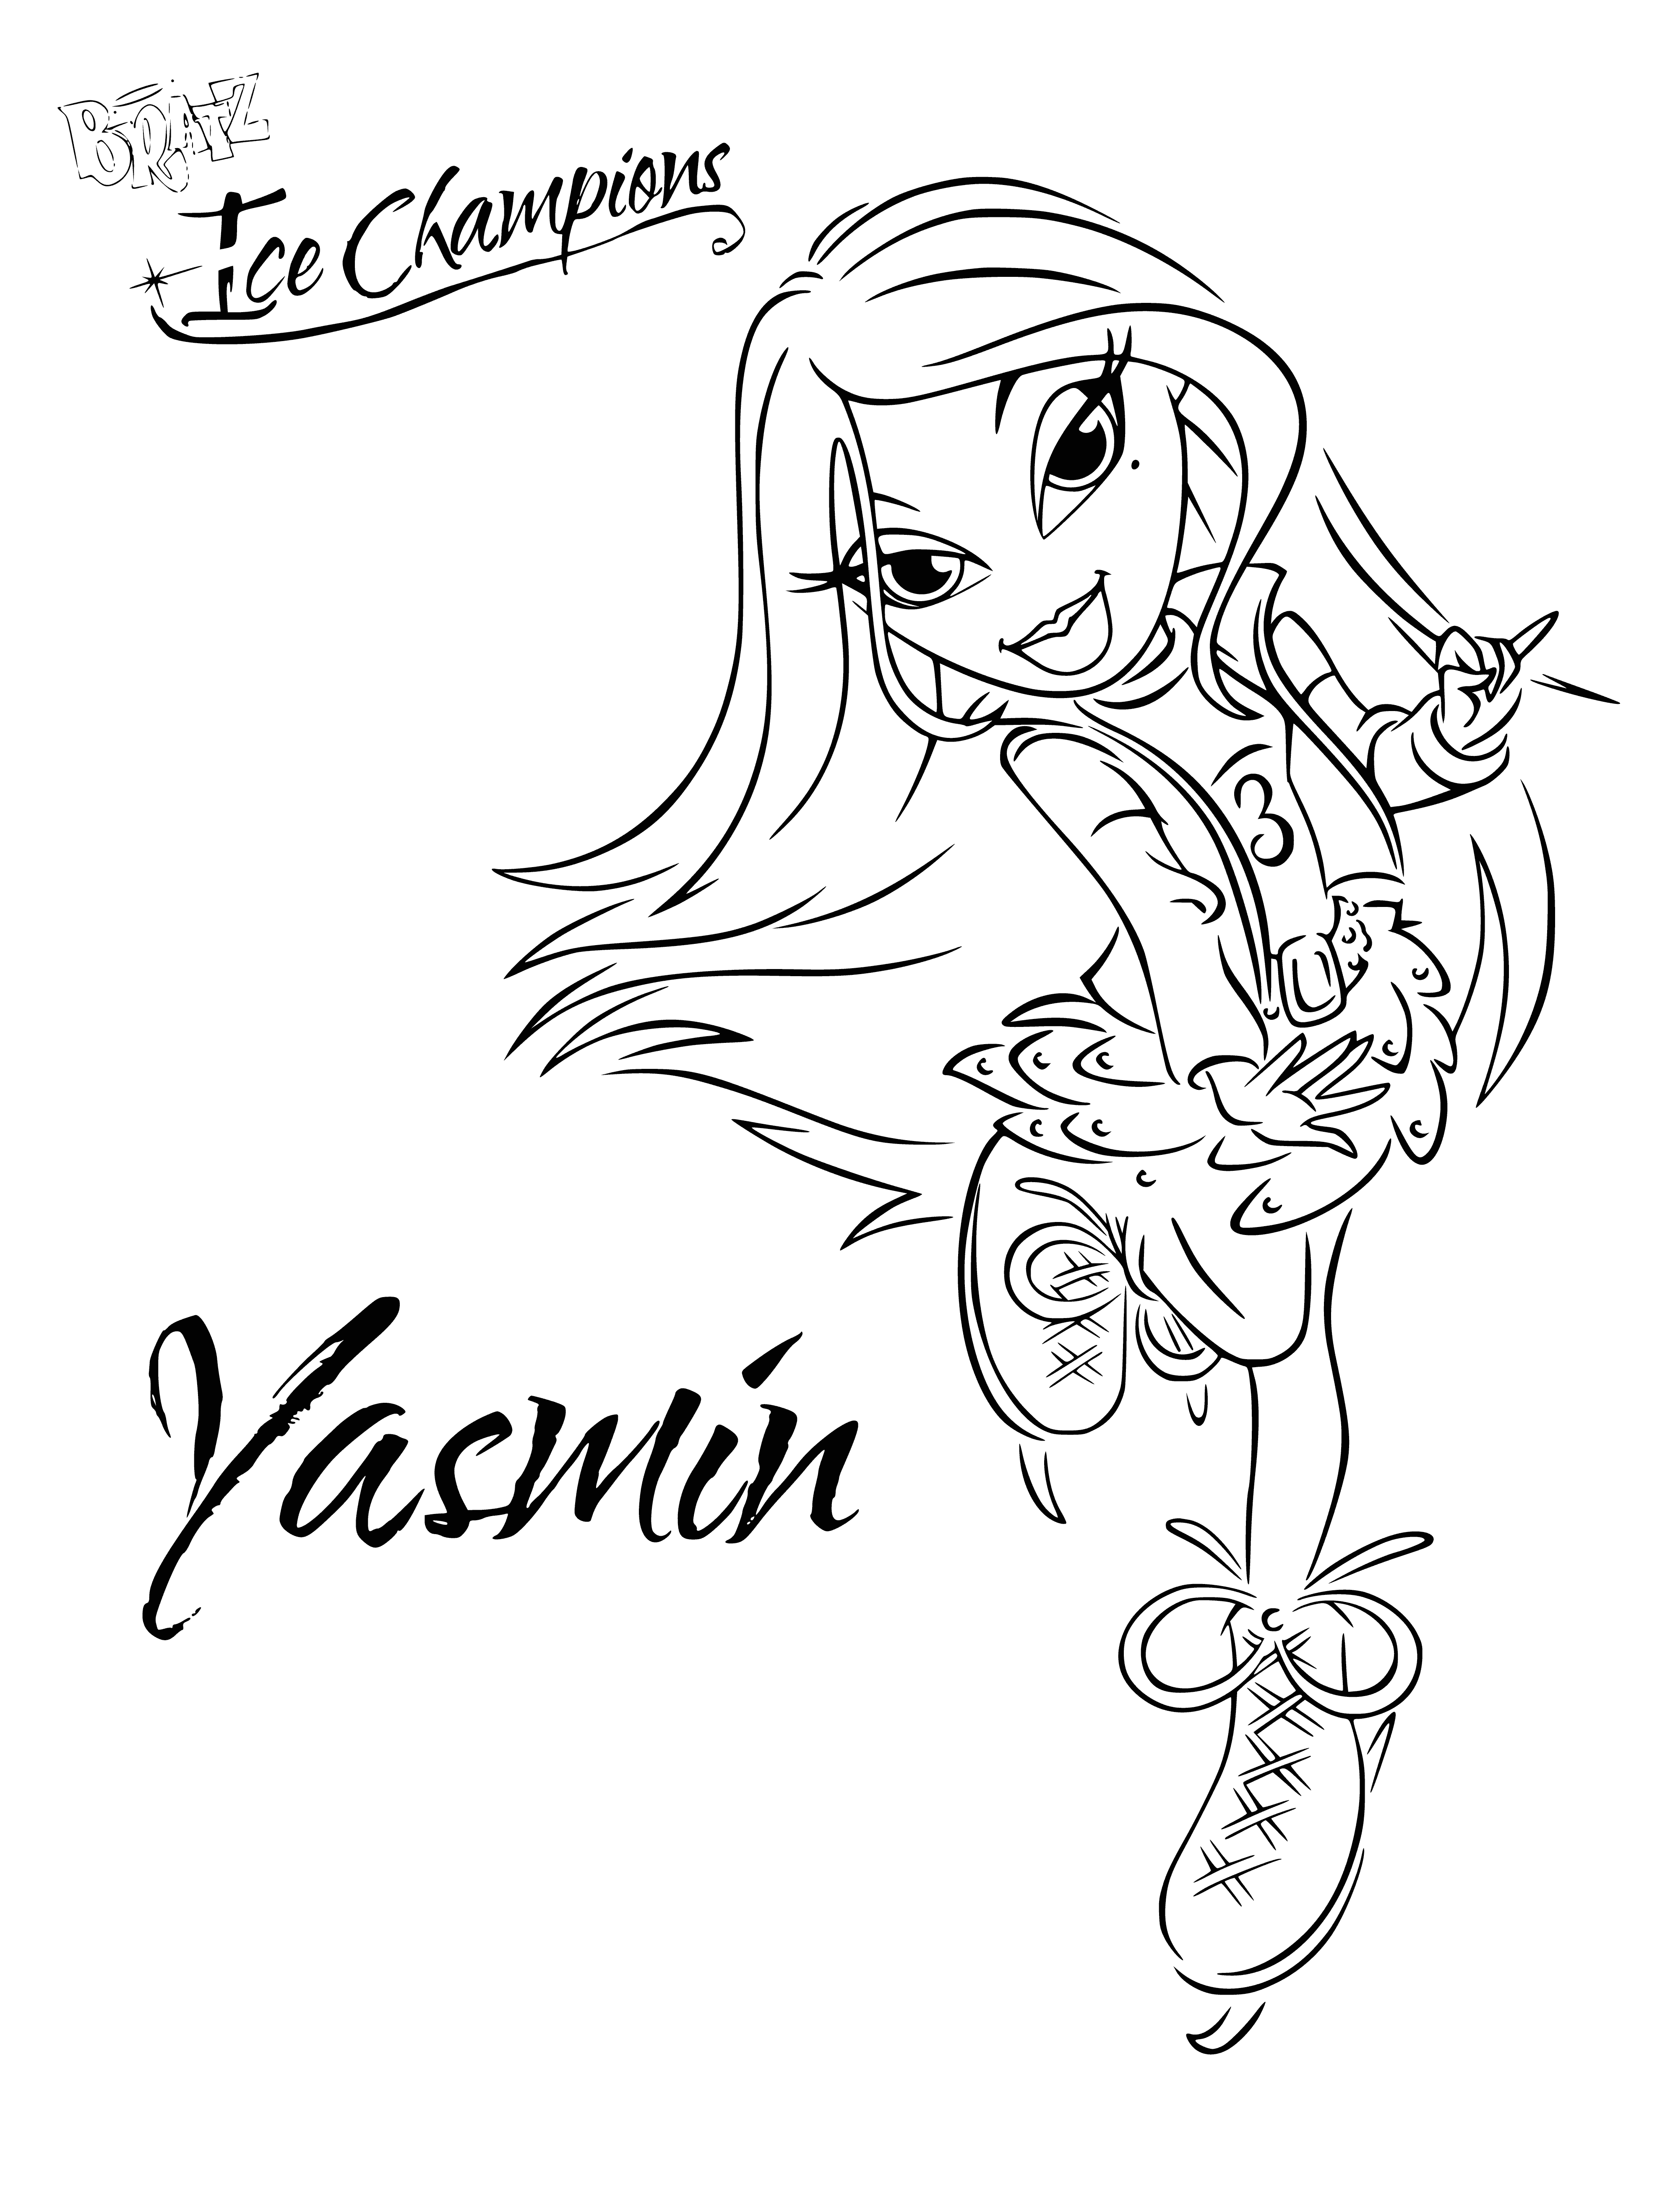 coloring page: Coloring page of Bratz doll Yasmin: young girl w/ brown skin, long black hair, lavender dress & purple shoes. #dolls #fun #coloring